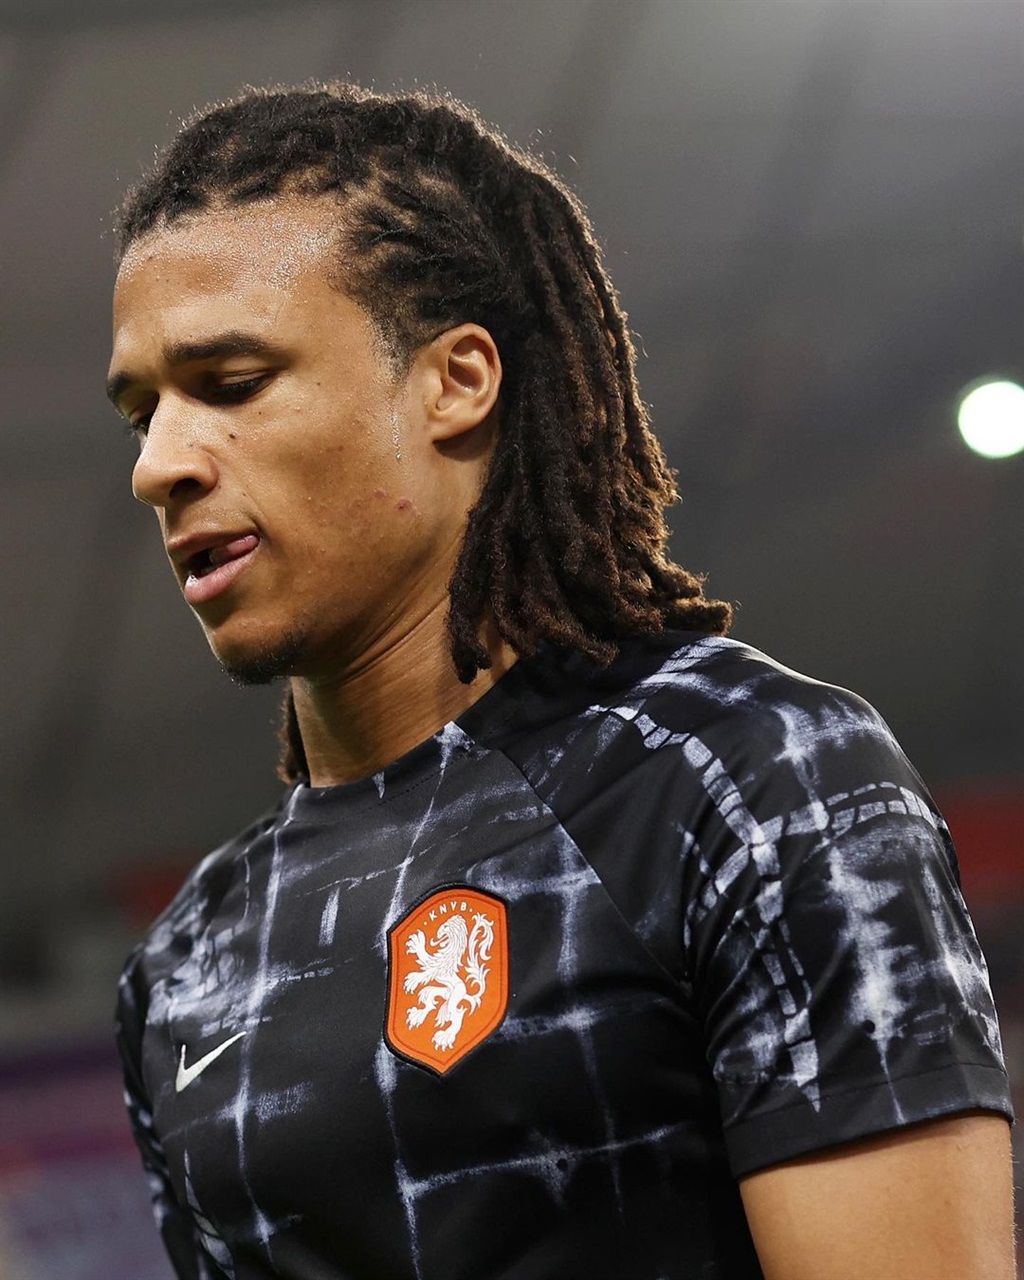 The Netherlands in their World Cup warm-up jerseys